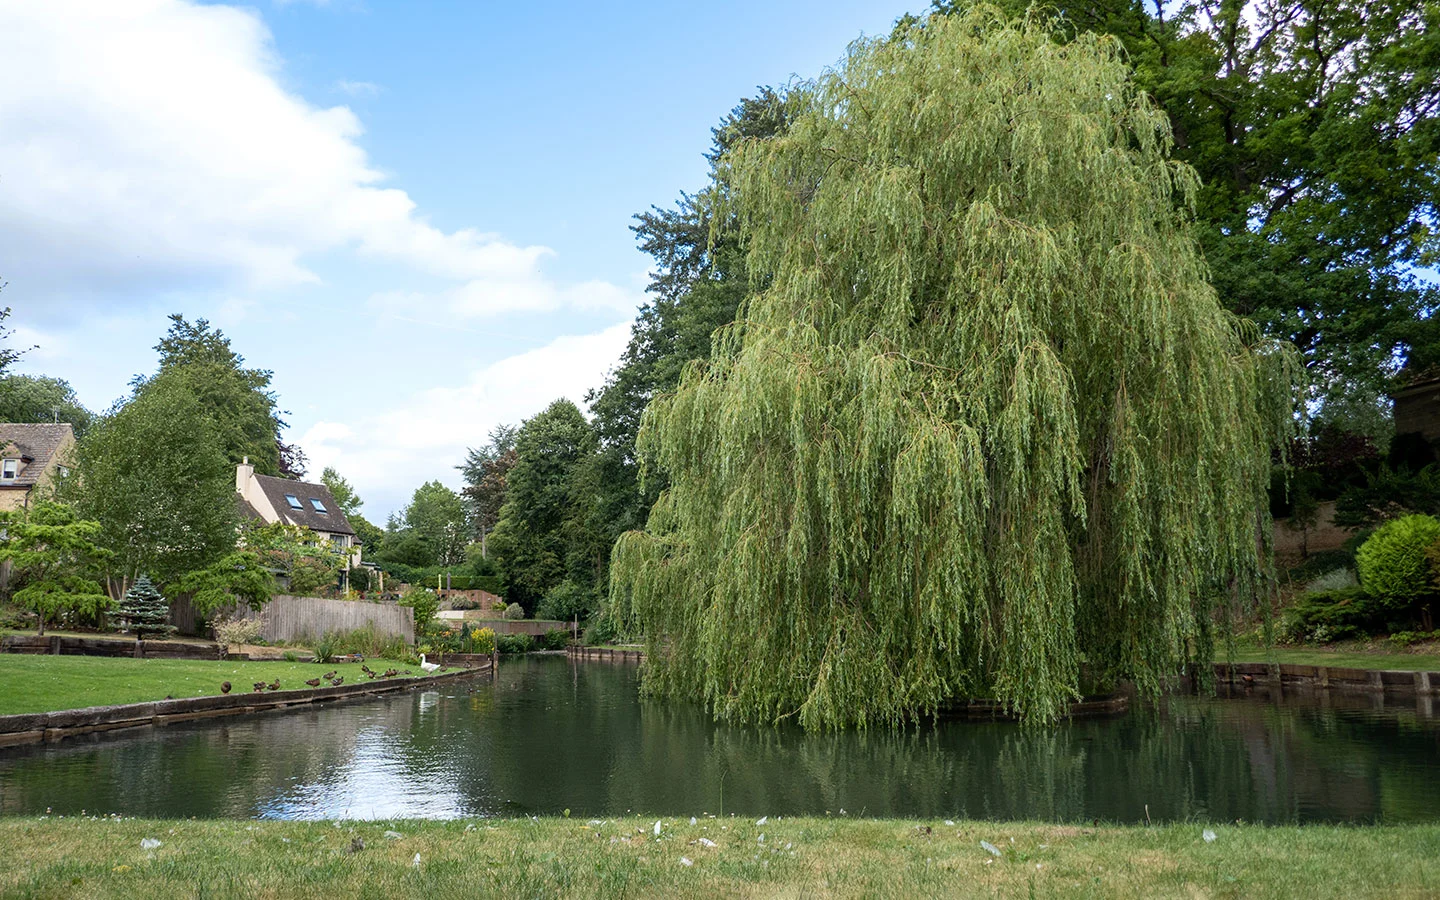 Pond with willow tree in Painswick